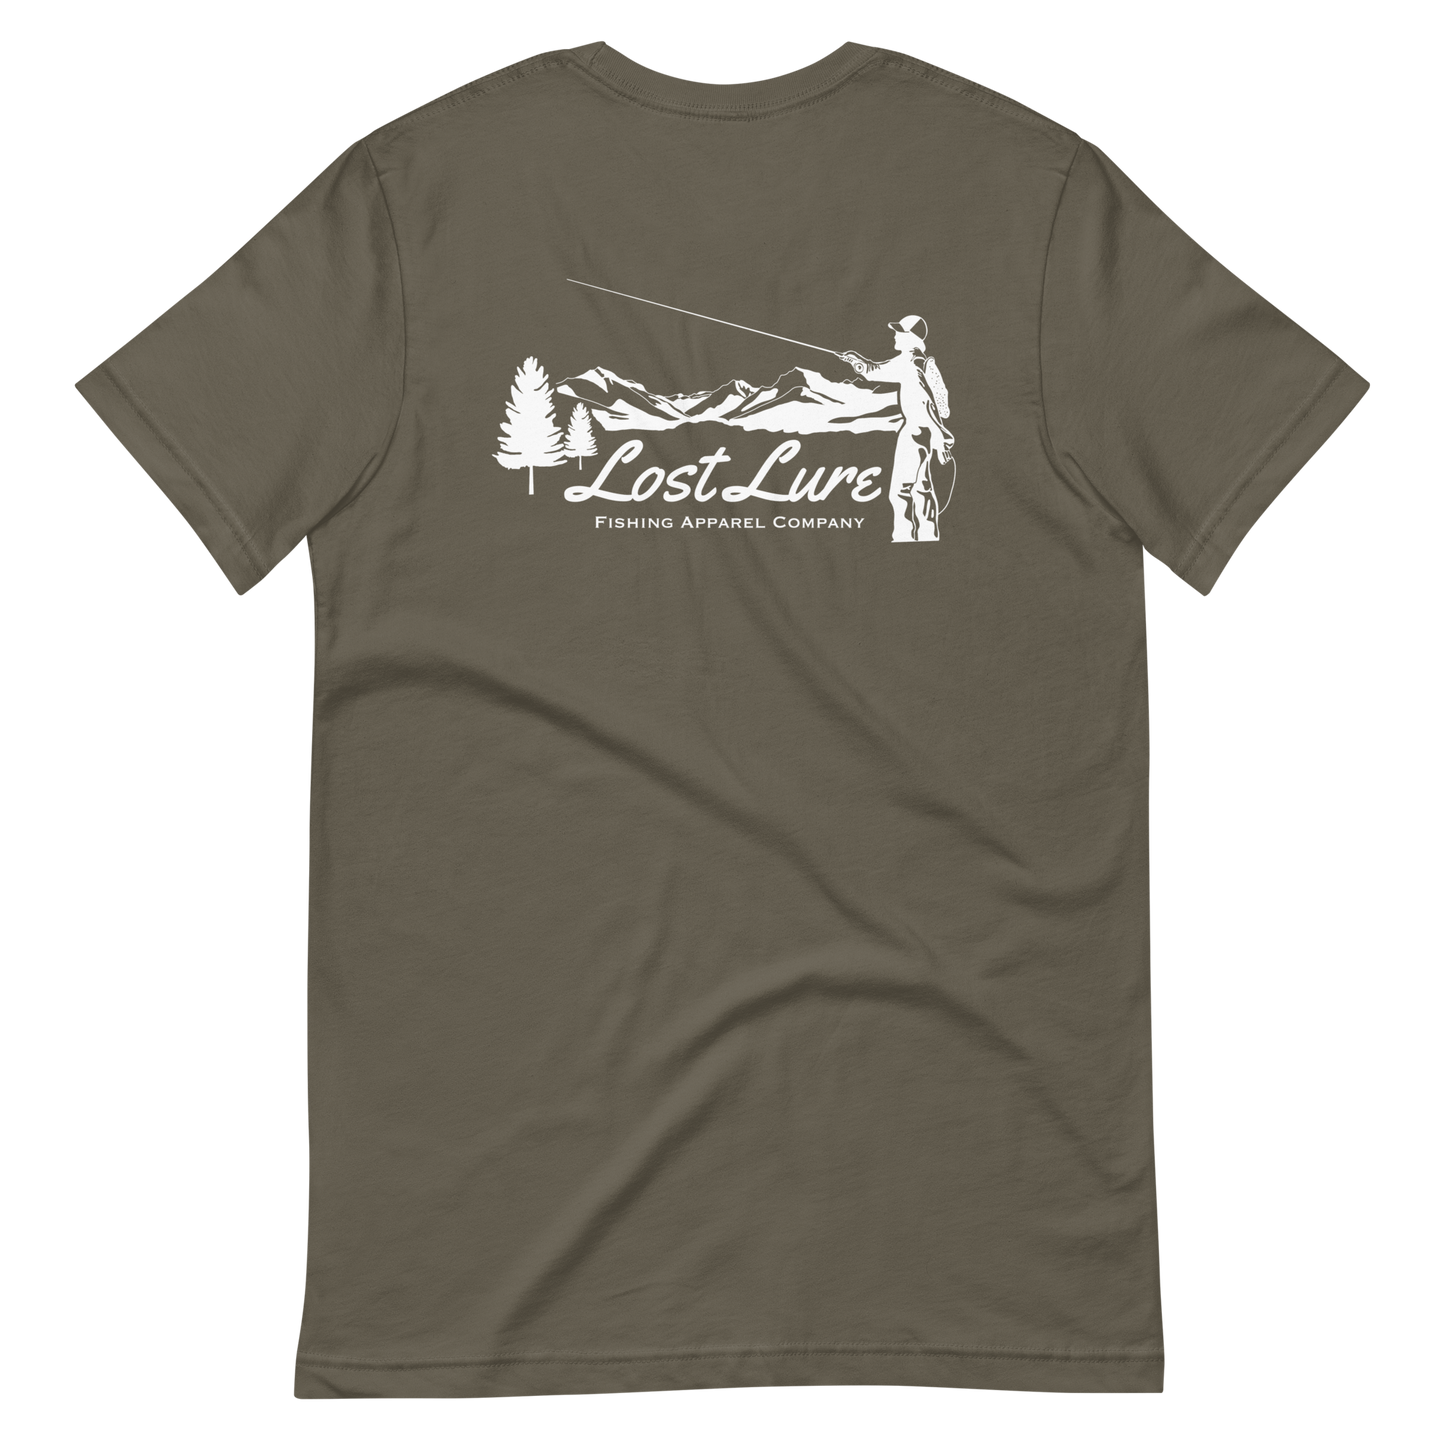 Fly fishing Lost lure shirt. It has a design on the back of the shirt black and white outline a fly fisherman and the Rocky Mountains. Green fishing shirt, back side 